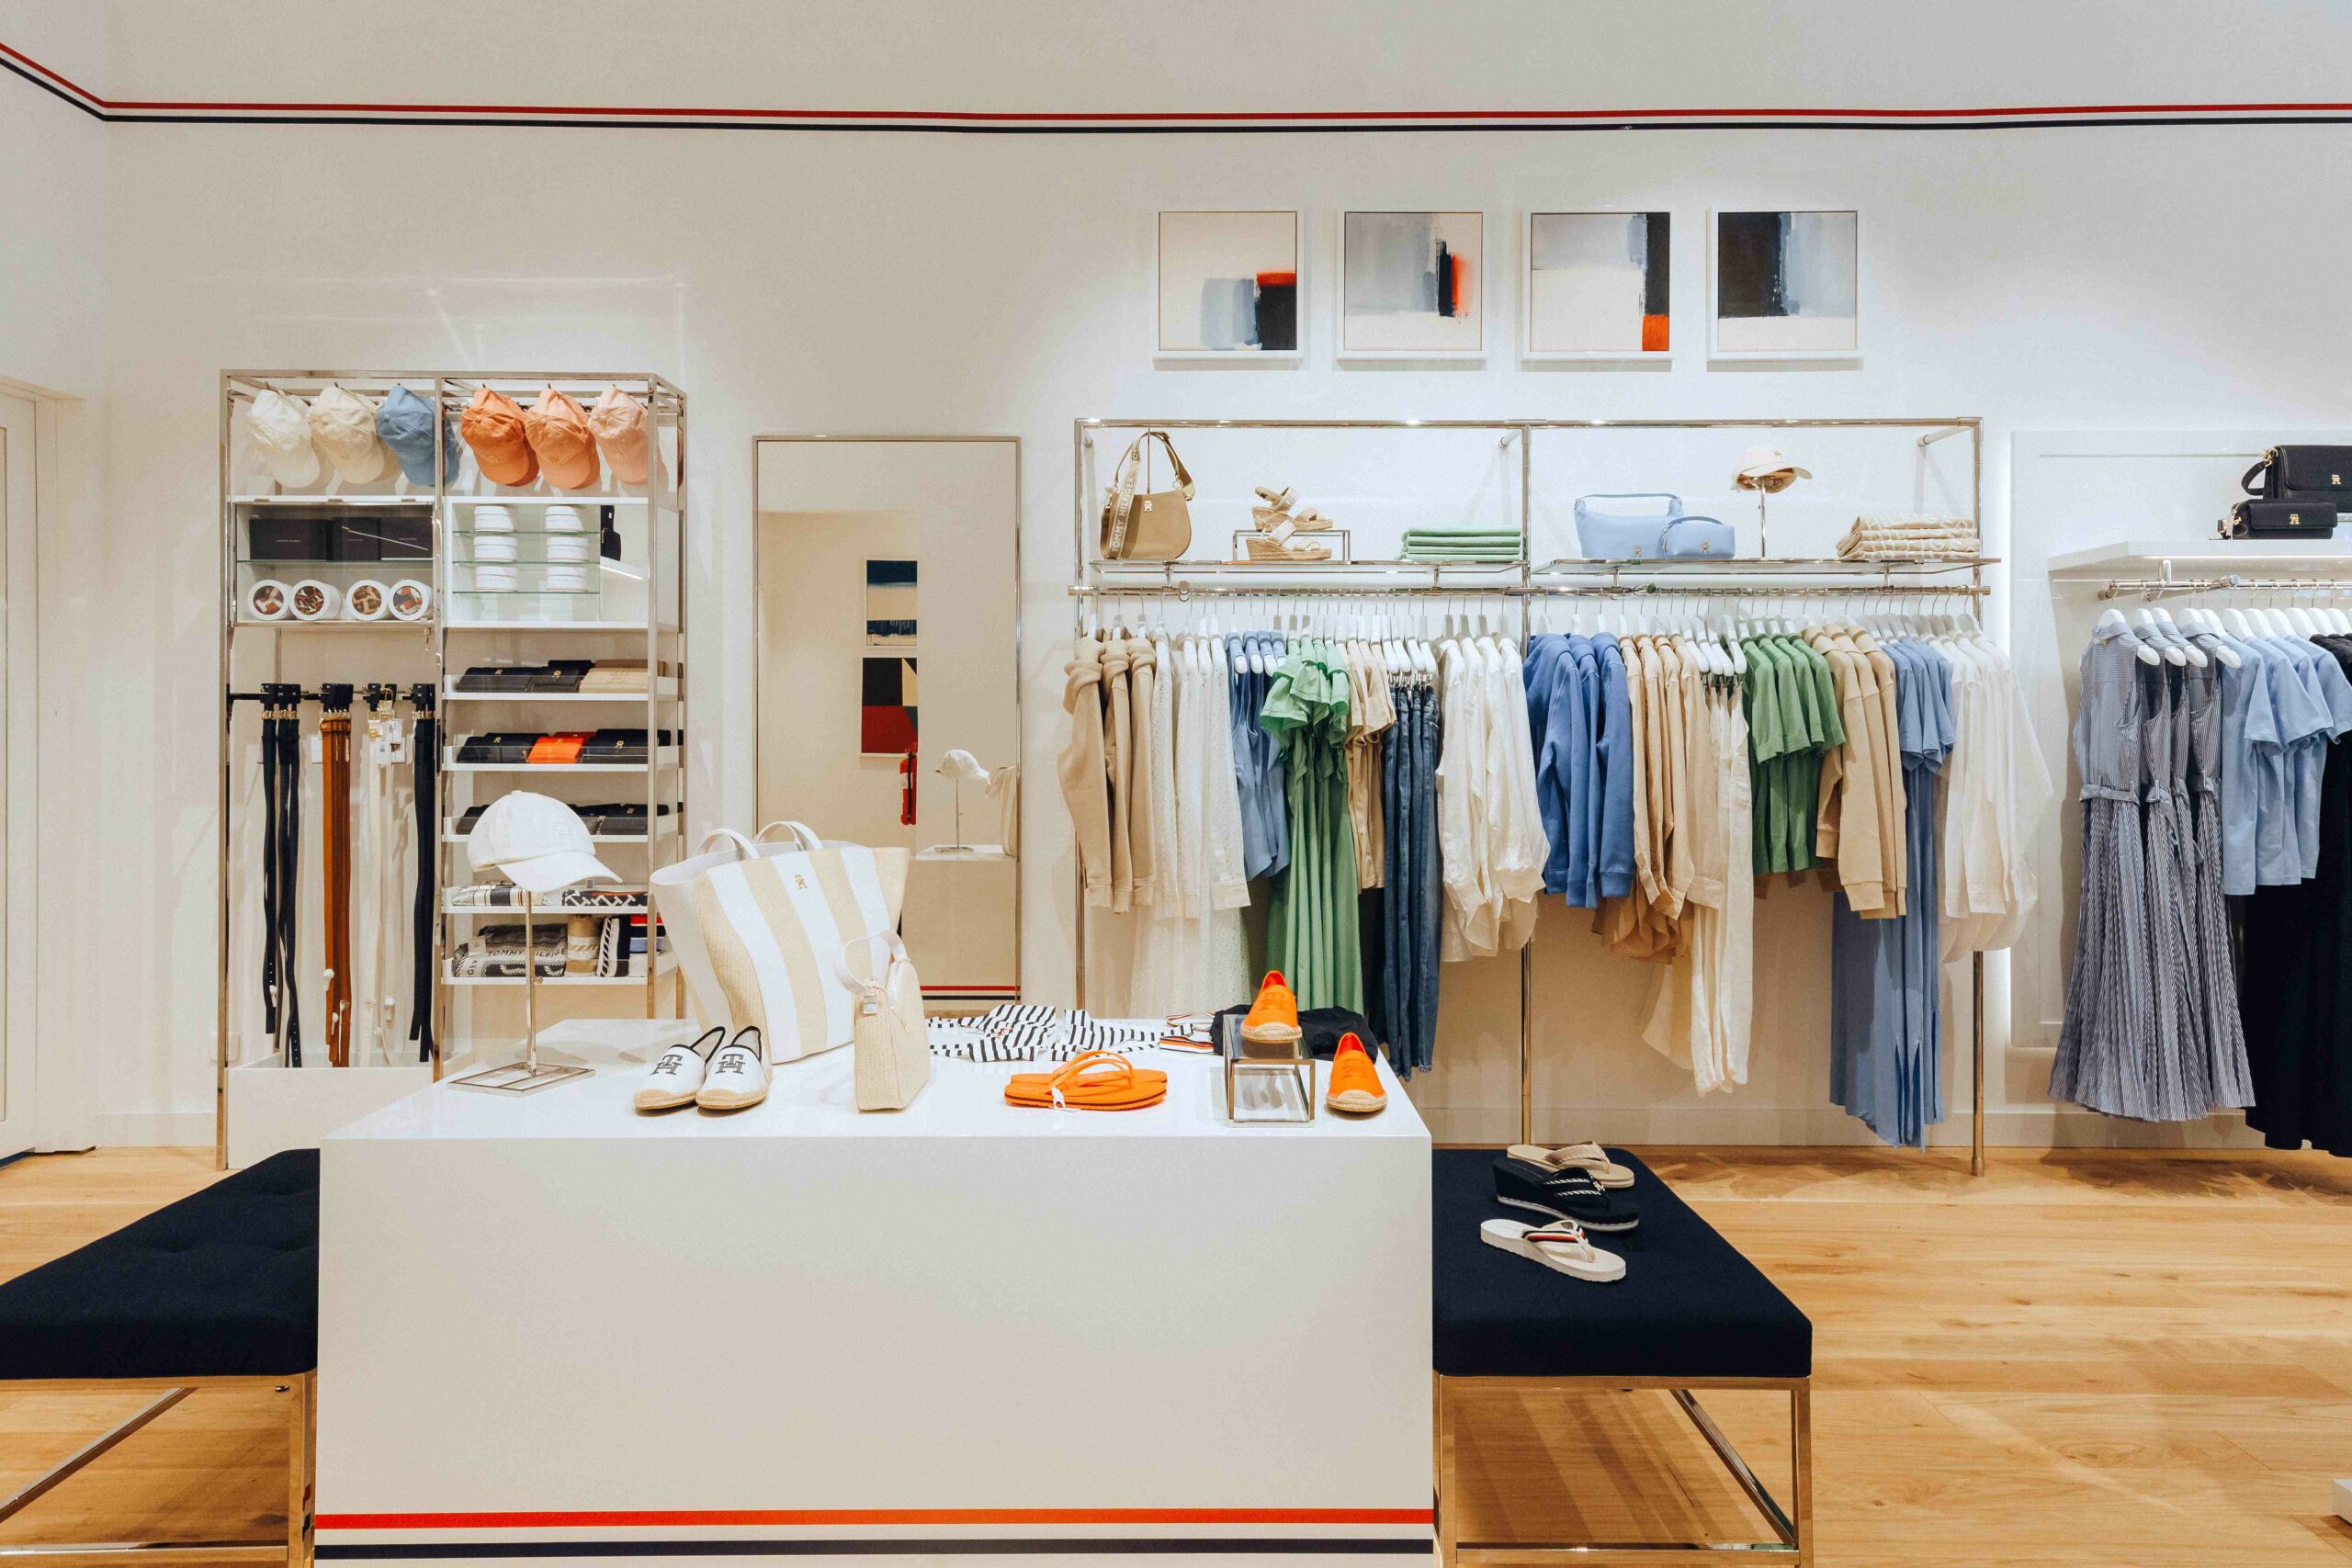 Hudson opens Fifth Tommy Hilfiger Store in Morocco - Hudson Holdings